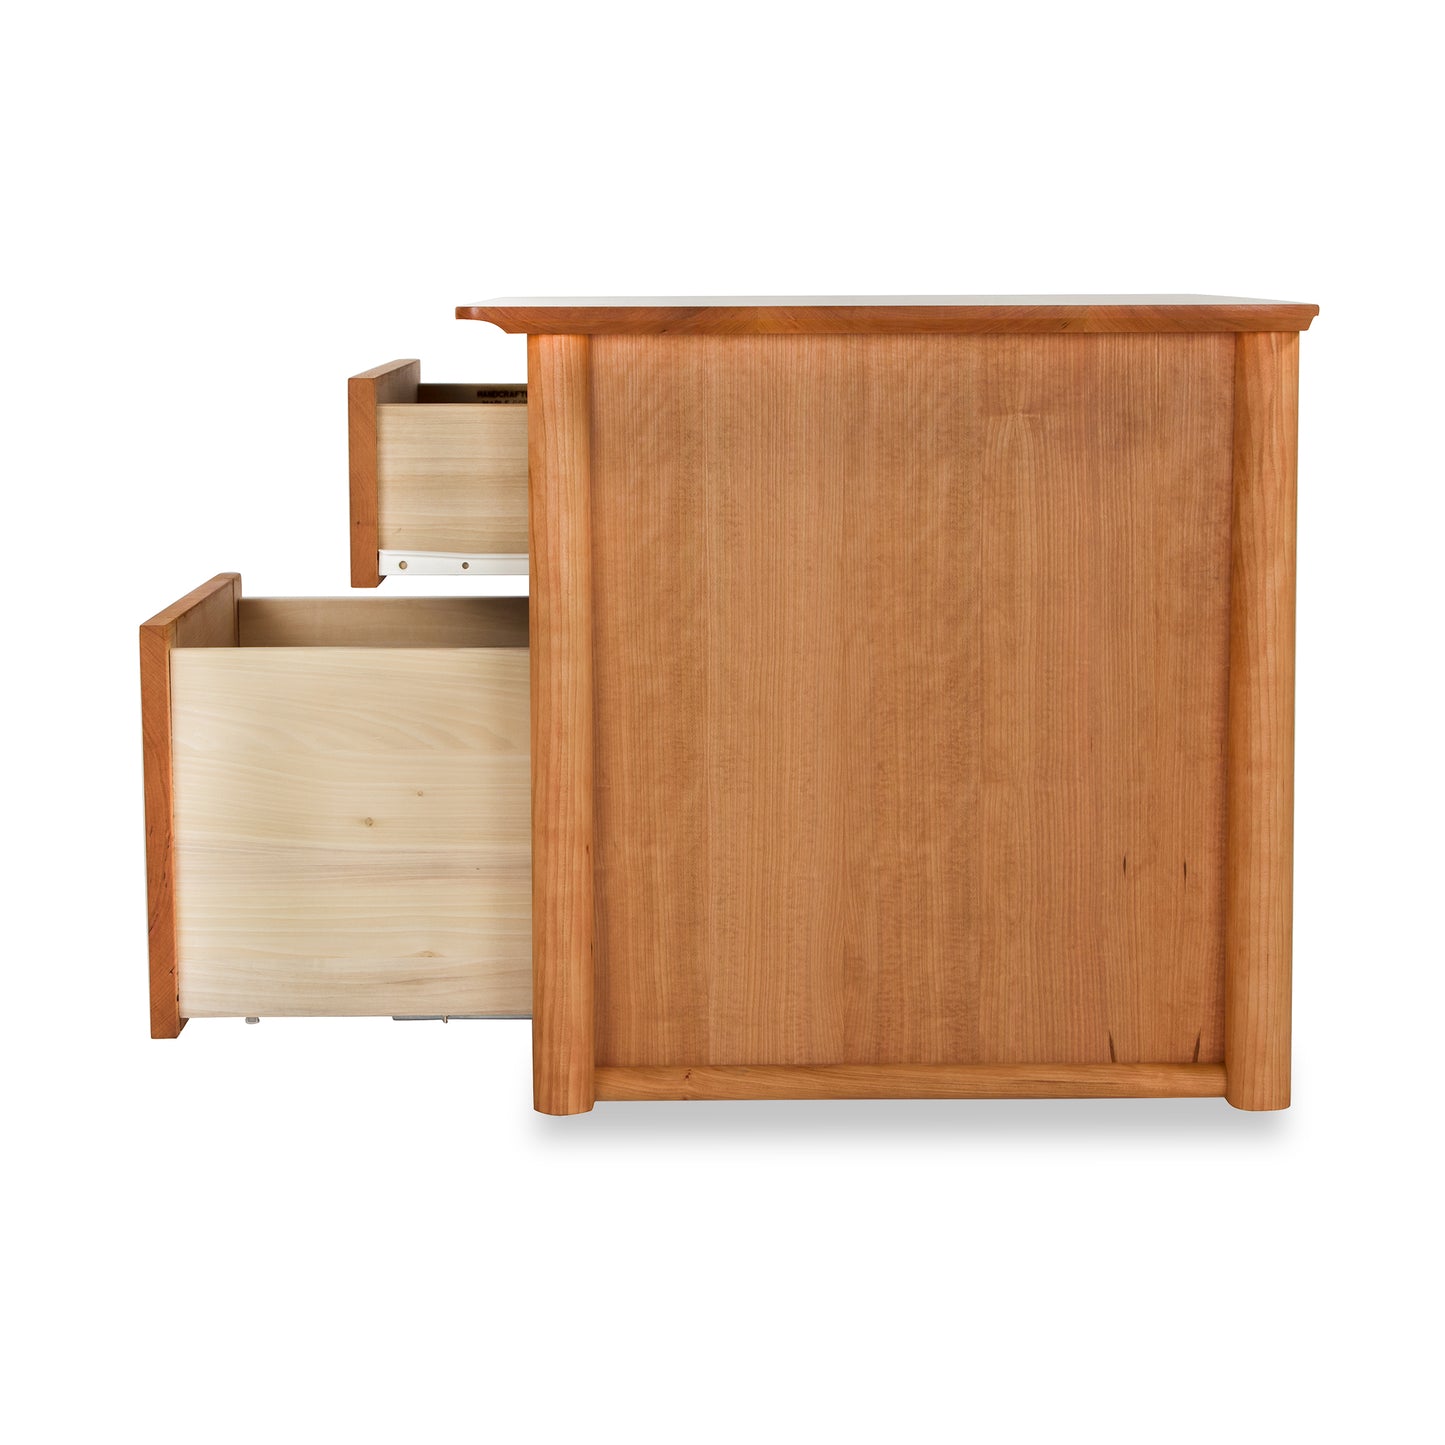 Wooden nightstand with an open drawer, isolated on a white background, resembling a Maple Corner Woodworks Cherry Moon File Cabinet.